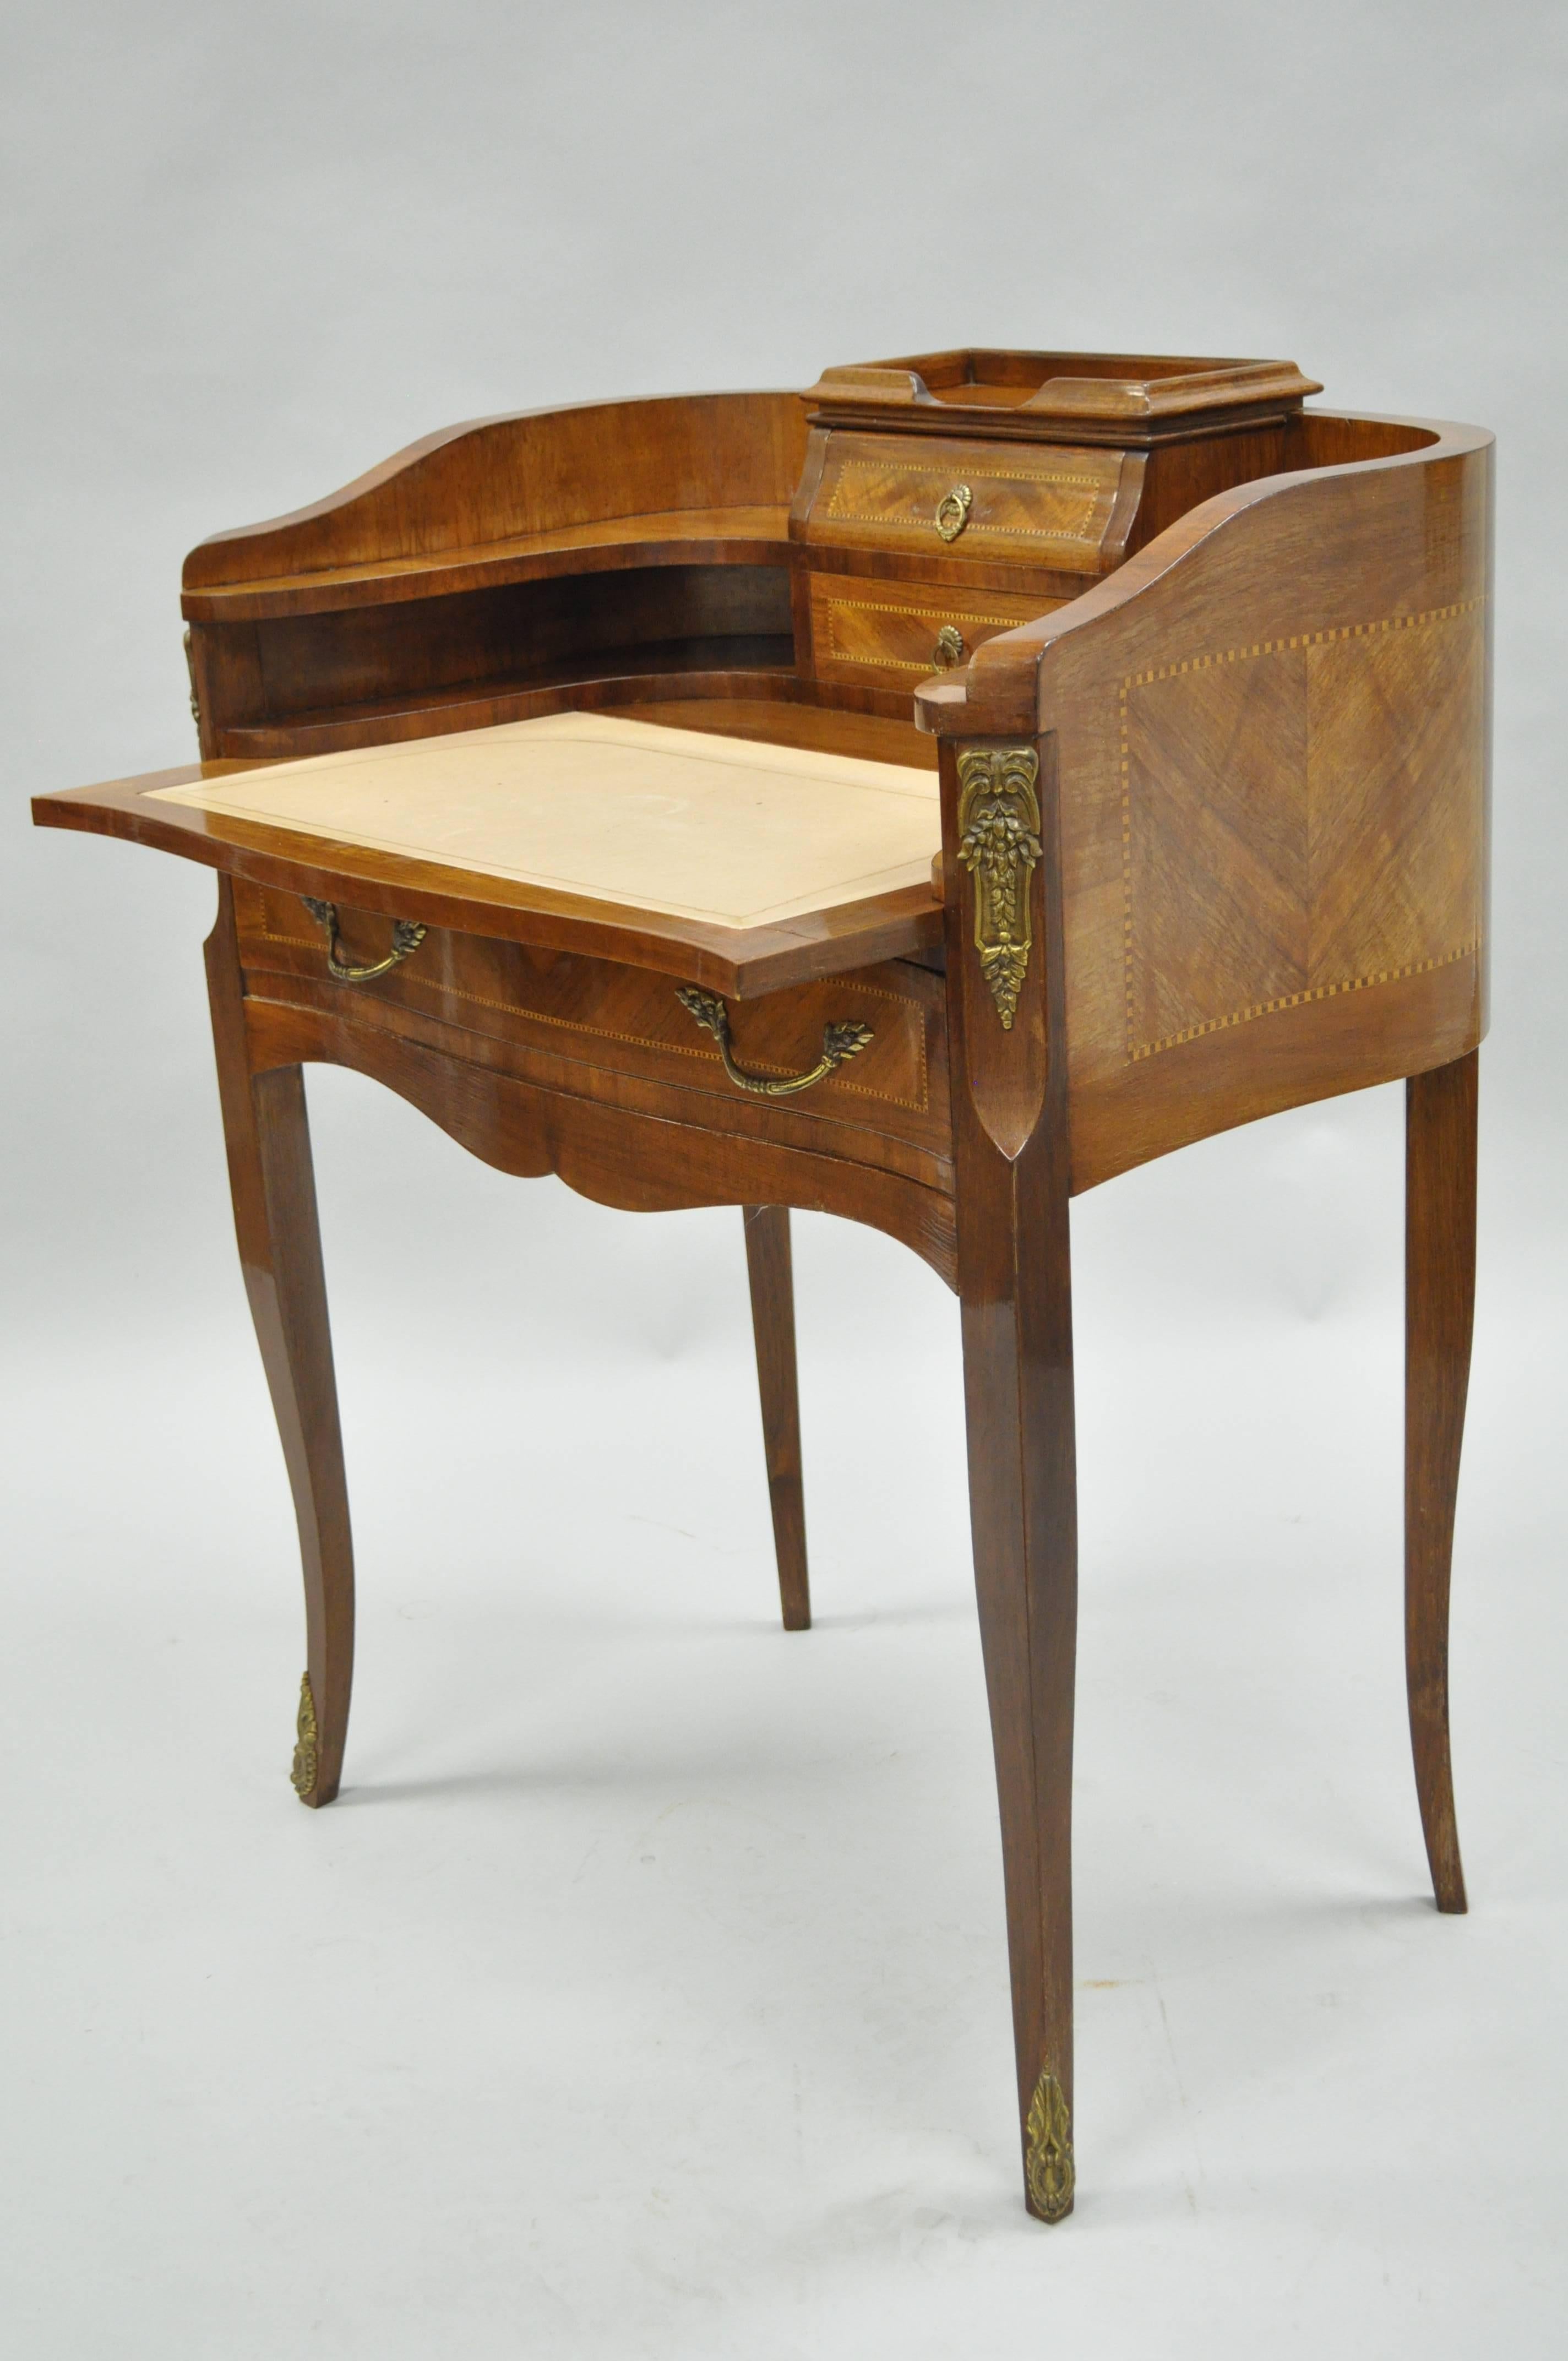 Vintage Petite Louis XV French style satinwood inlaid demilune form ladies writing desk. Item features a pull out leather top writing surface, bronze-mounted ormolu, parquetry inlaid back, and adorable petite form. 